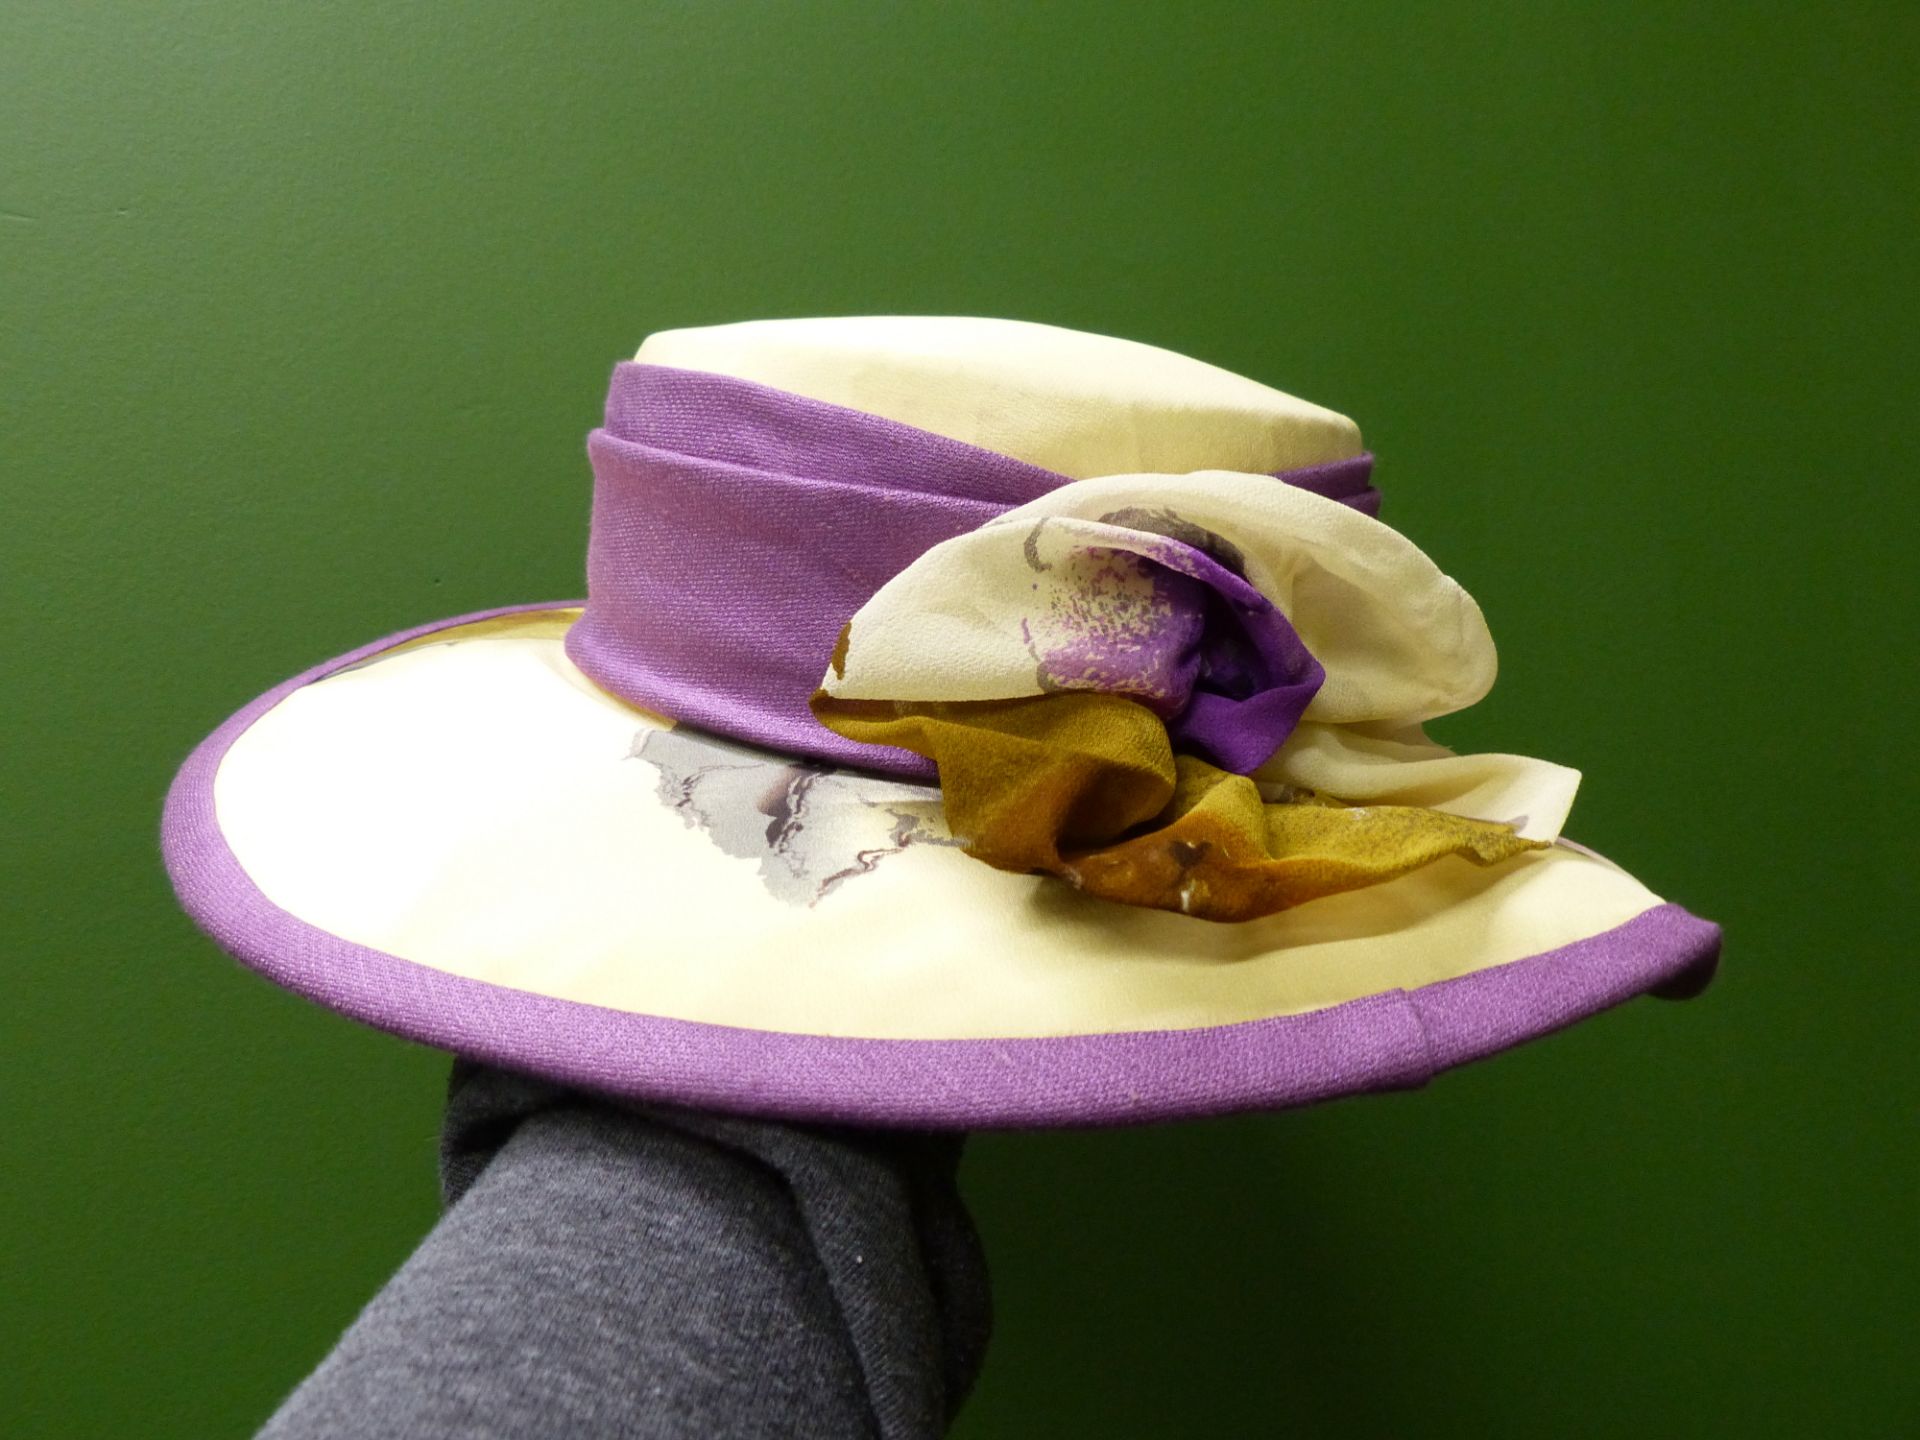 HATS. CHRISTYS ENGLAND BOATER HAT SIZE 58 71/2. TOGETHER WITH A LADIES WEDDING HAT. - Image 9 of 9